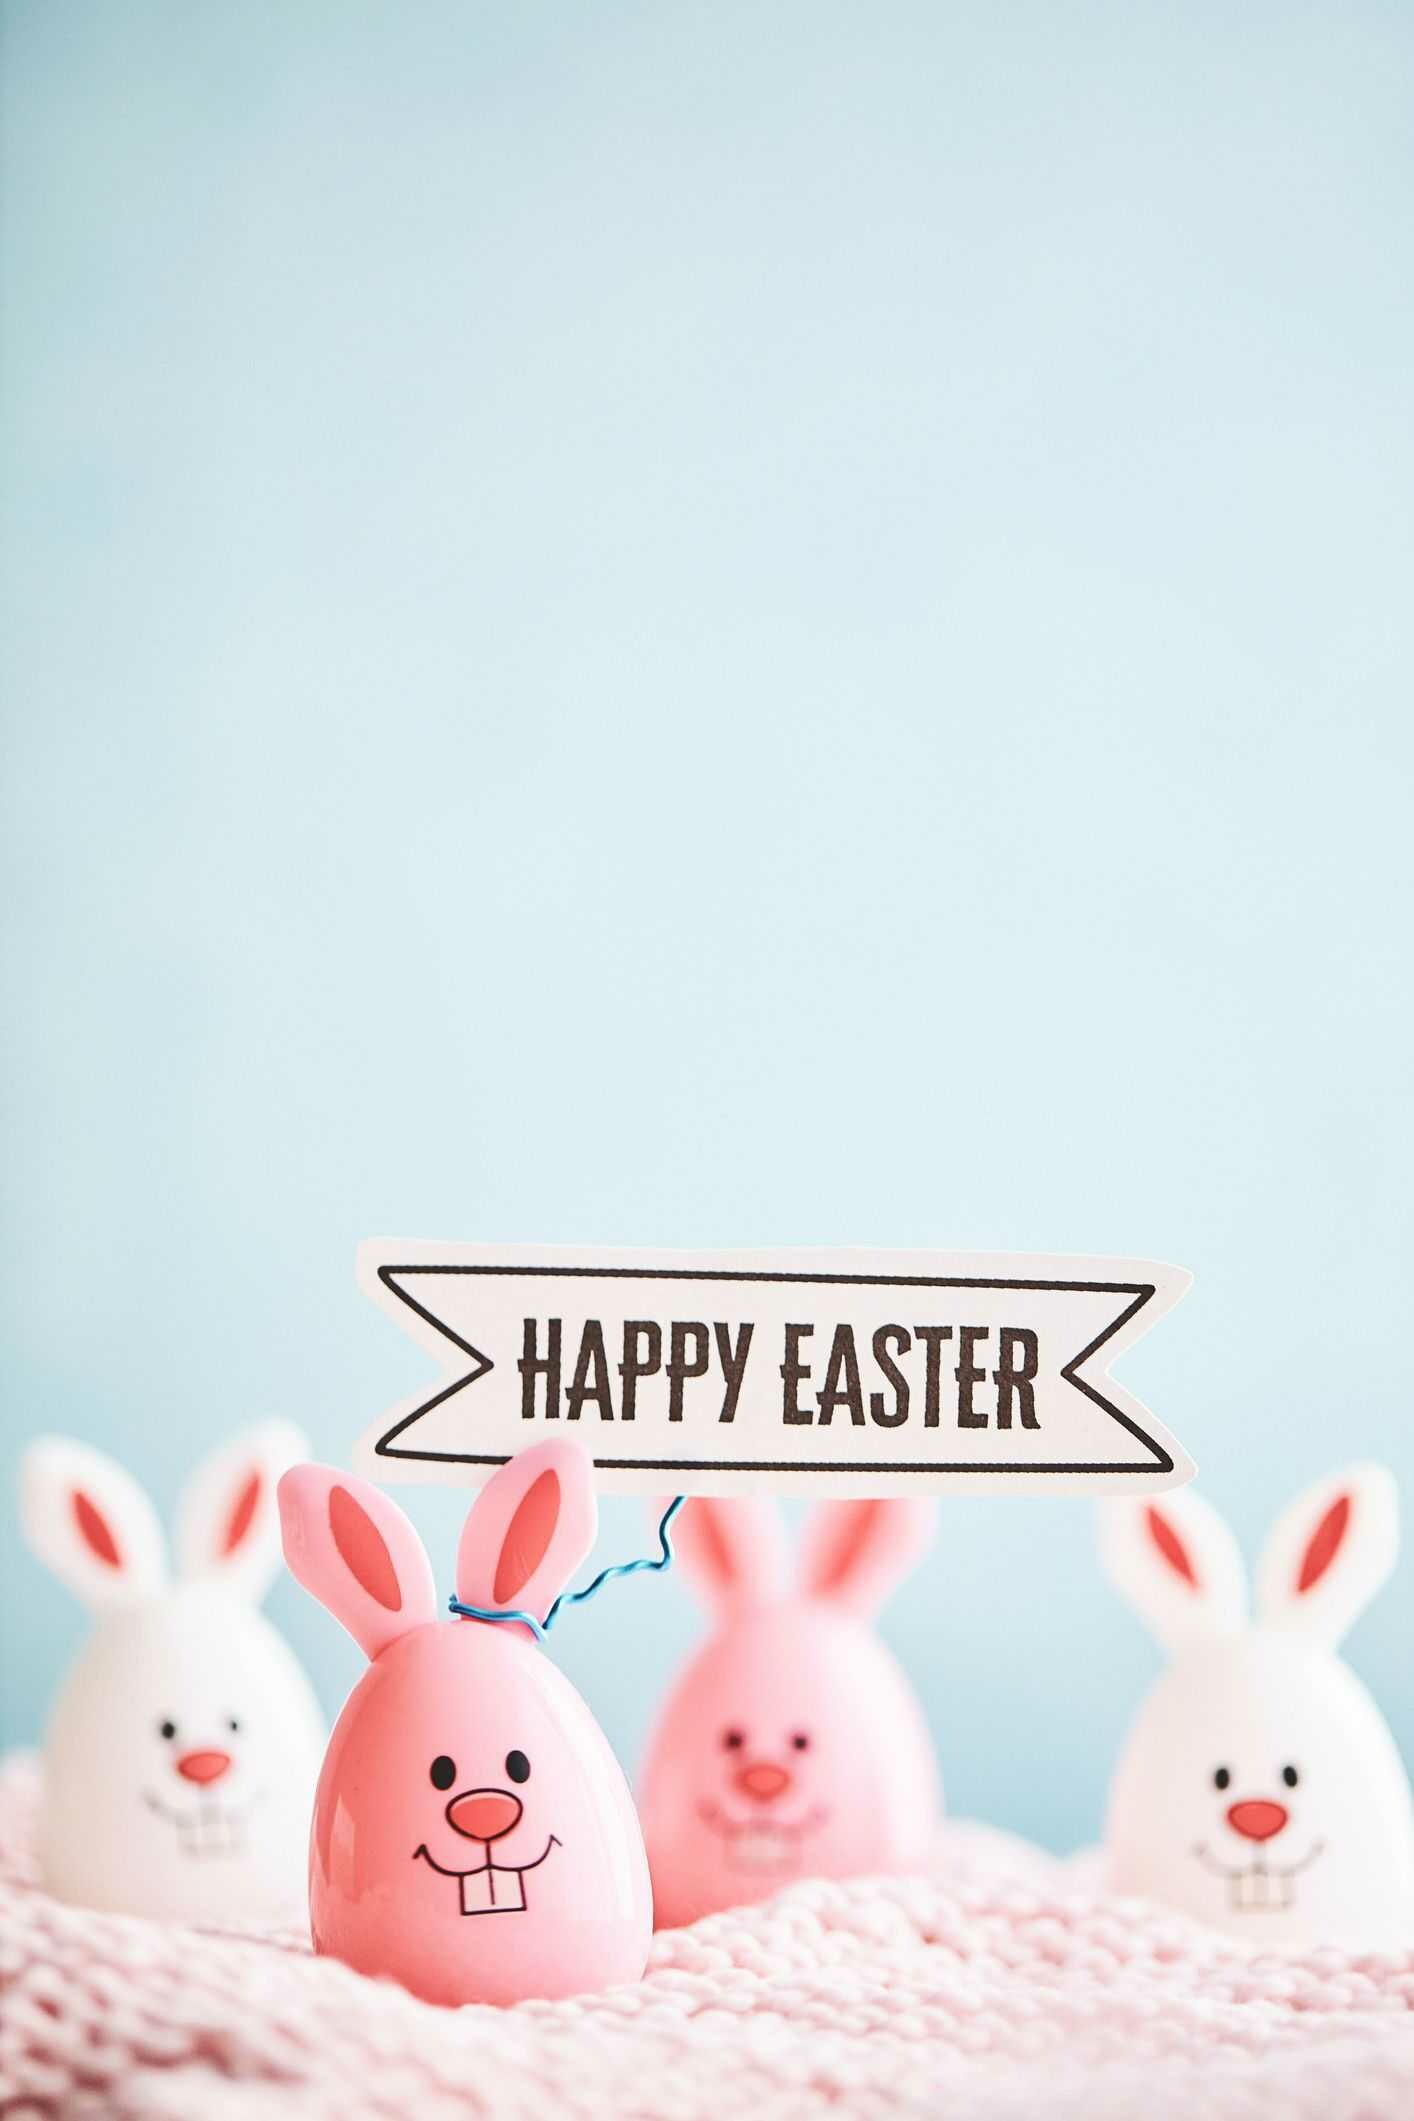 Easter: The Bunny is a folkloric figure and symbol of the holiday. 1420x2130 HD Background.